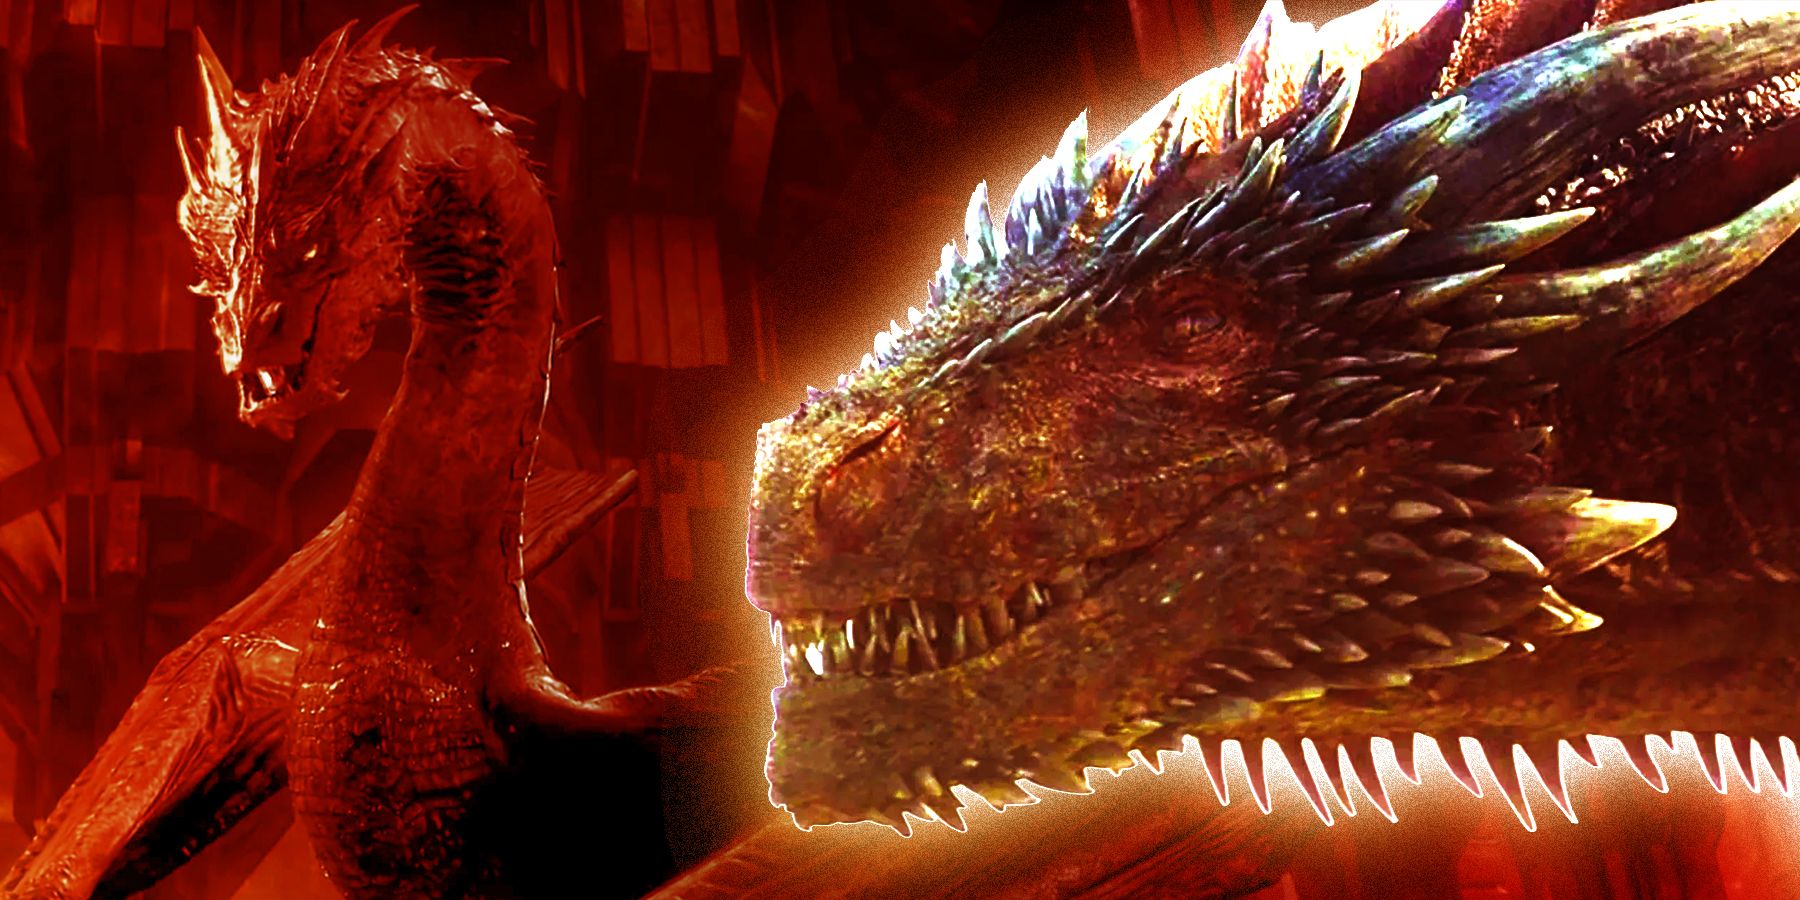 Biggest Dragons of all time - Gaming  Big dragon, Dragons of middle earth,  The hobbit